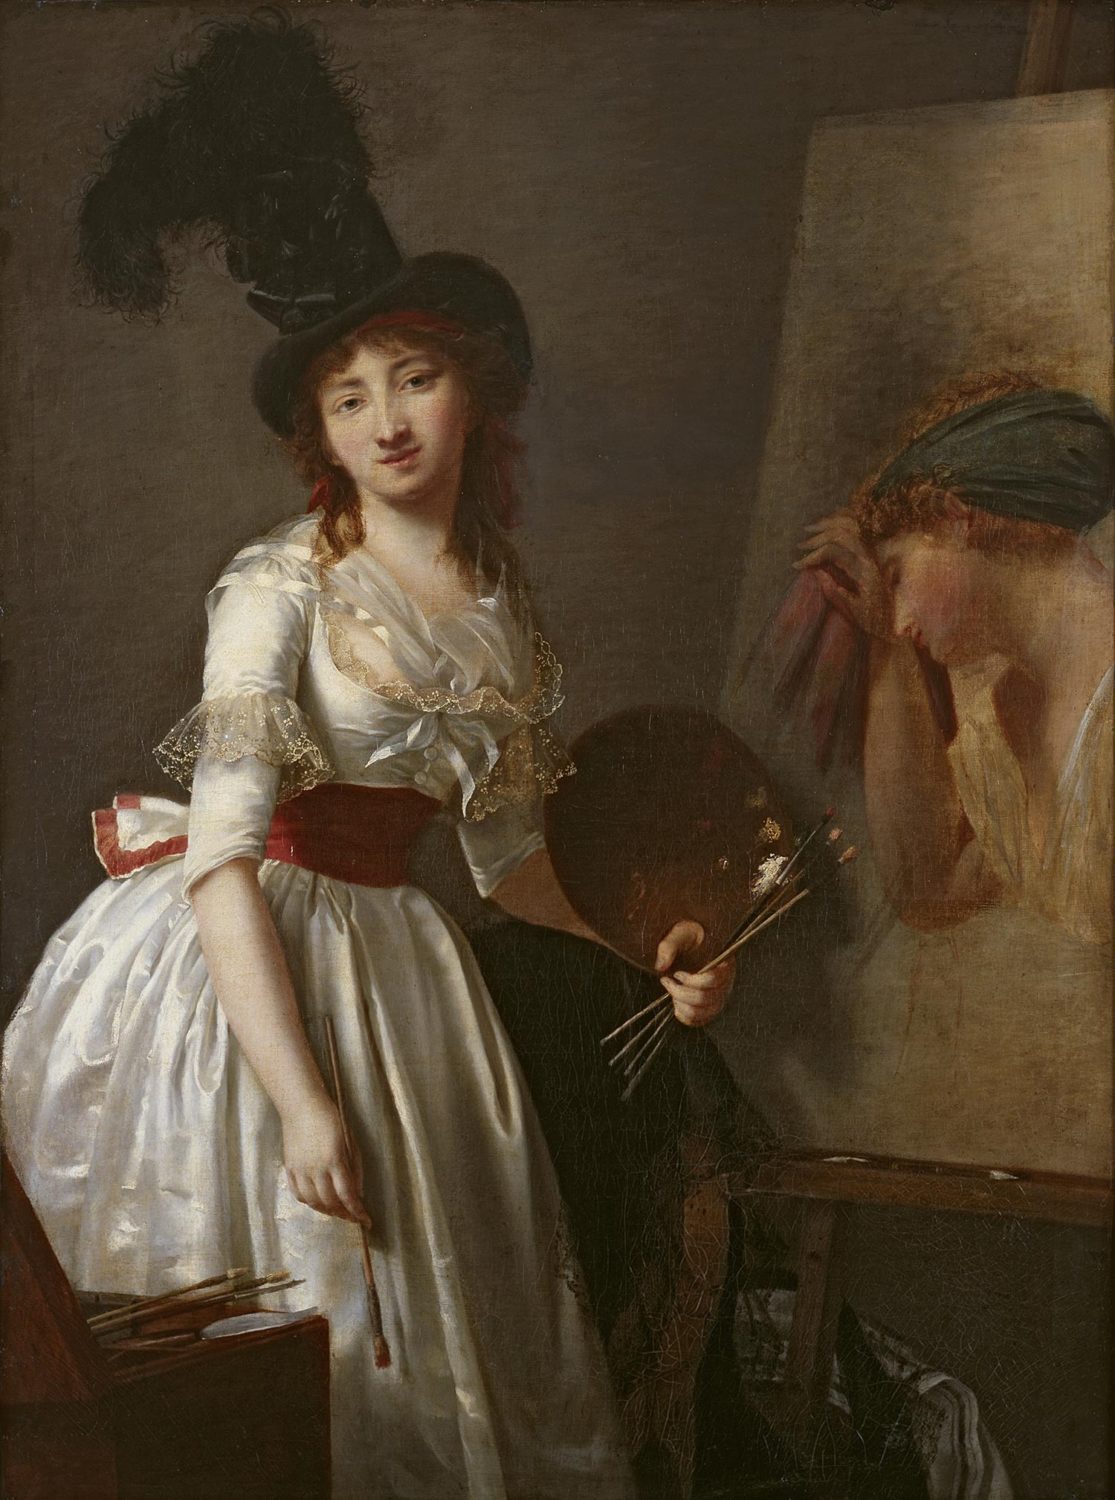 Restricted, but not Deterred: How Women Became Artists in the Rulebound Eighteenth Century - AWARE